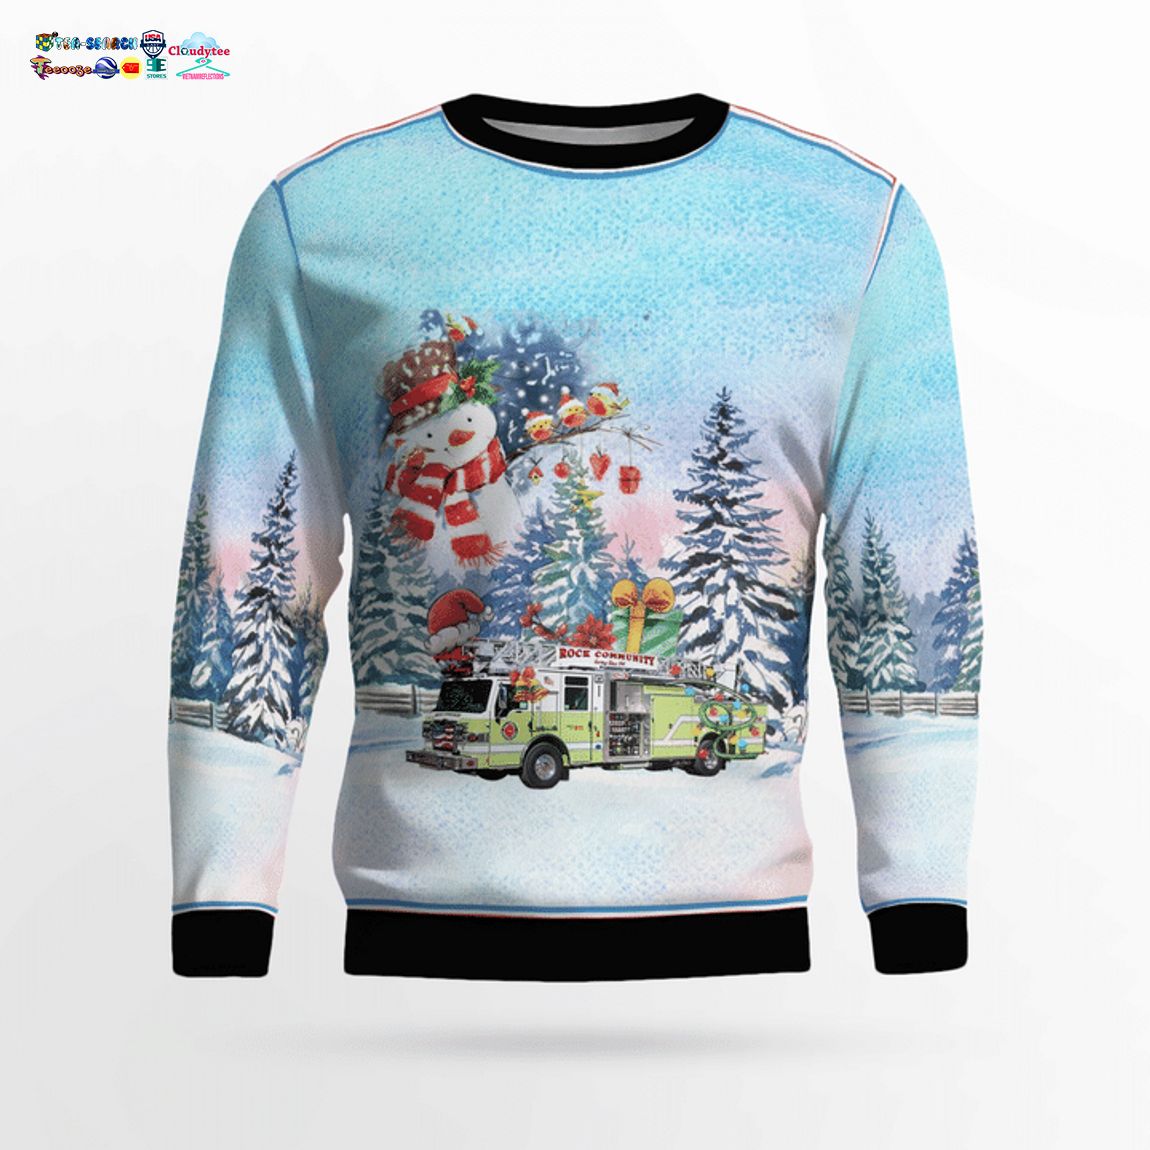 Missouri Rock Community Fire Protection District 3D Christmas Sweater